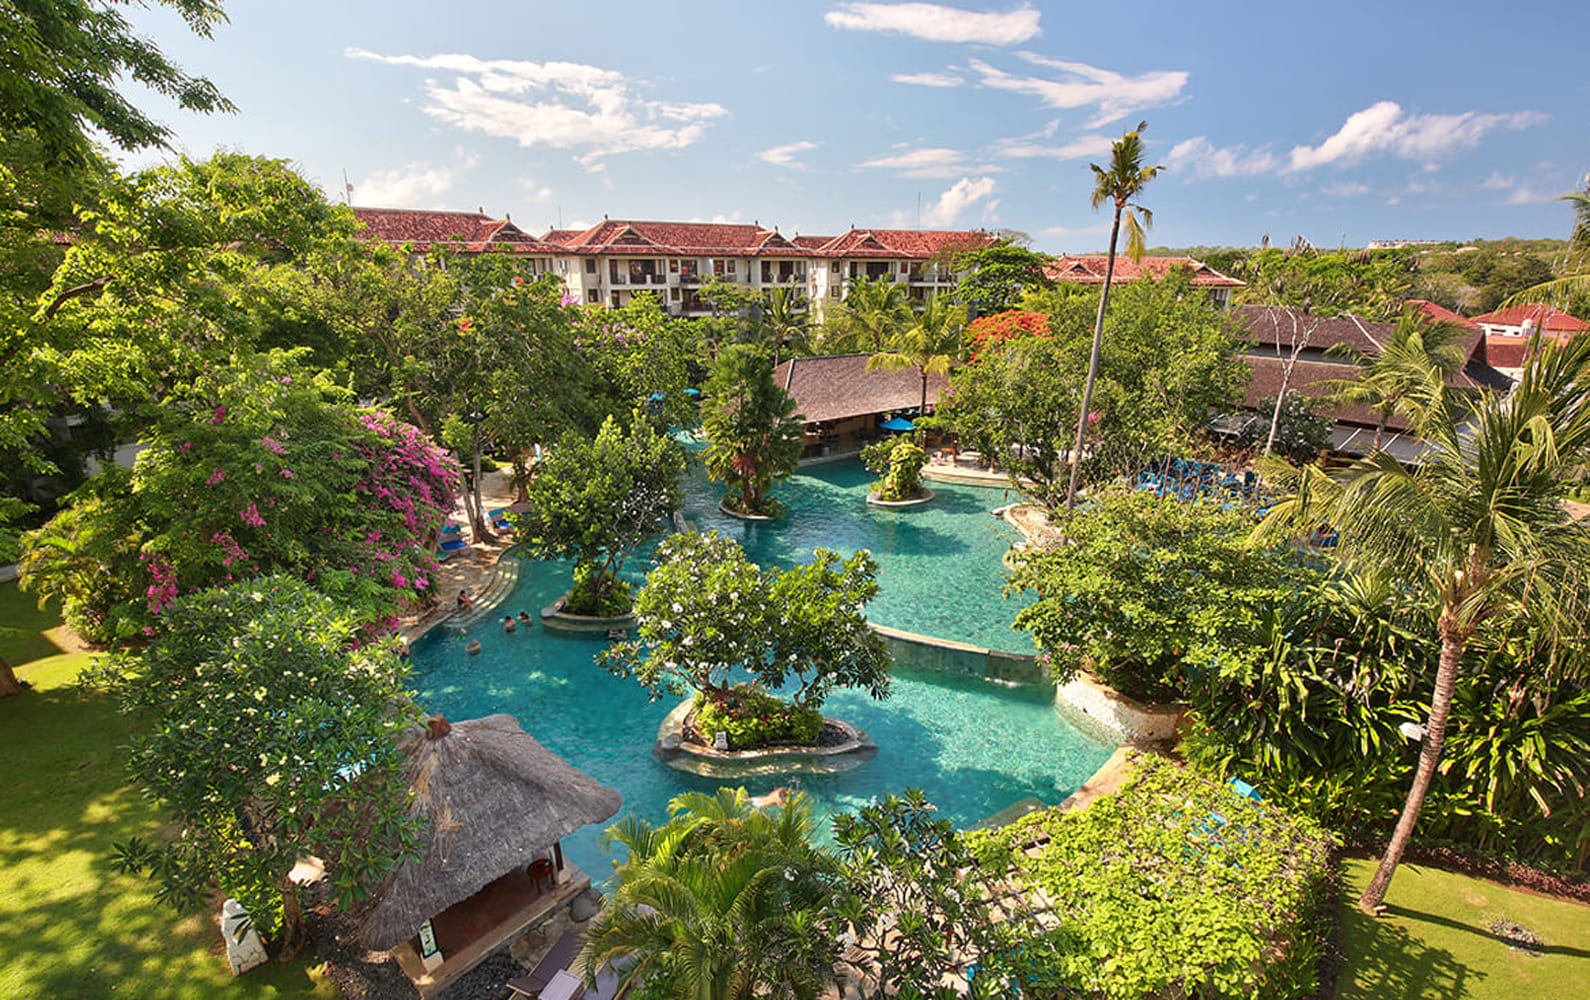 NUS-1170x736-2 Novotel Bali Nusa Dua | Accor Vacation Club ApartmentNovotel Bali Nusa Dua is located in the heart of tranquil Bali Tourism Development Complex, Nusa Dua. Only 45 minutes away from the famous Uluwatu Temple.